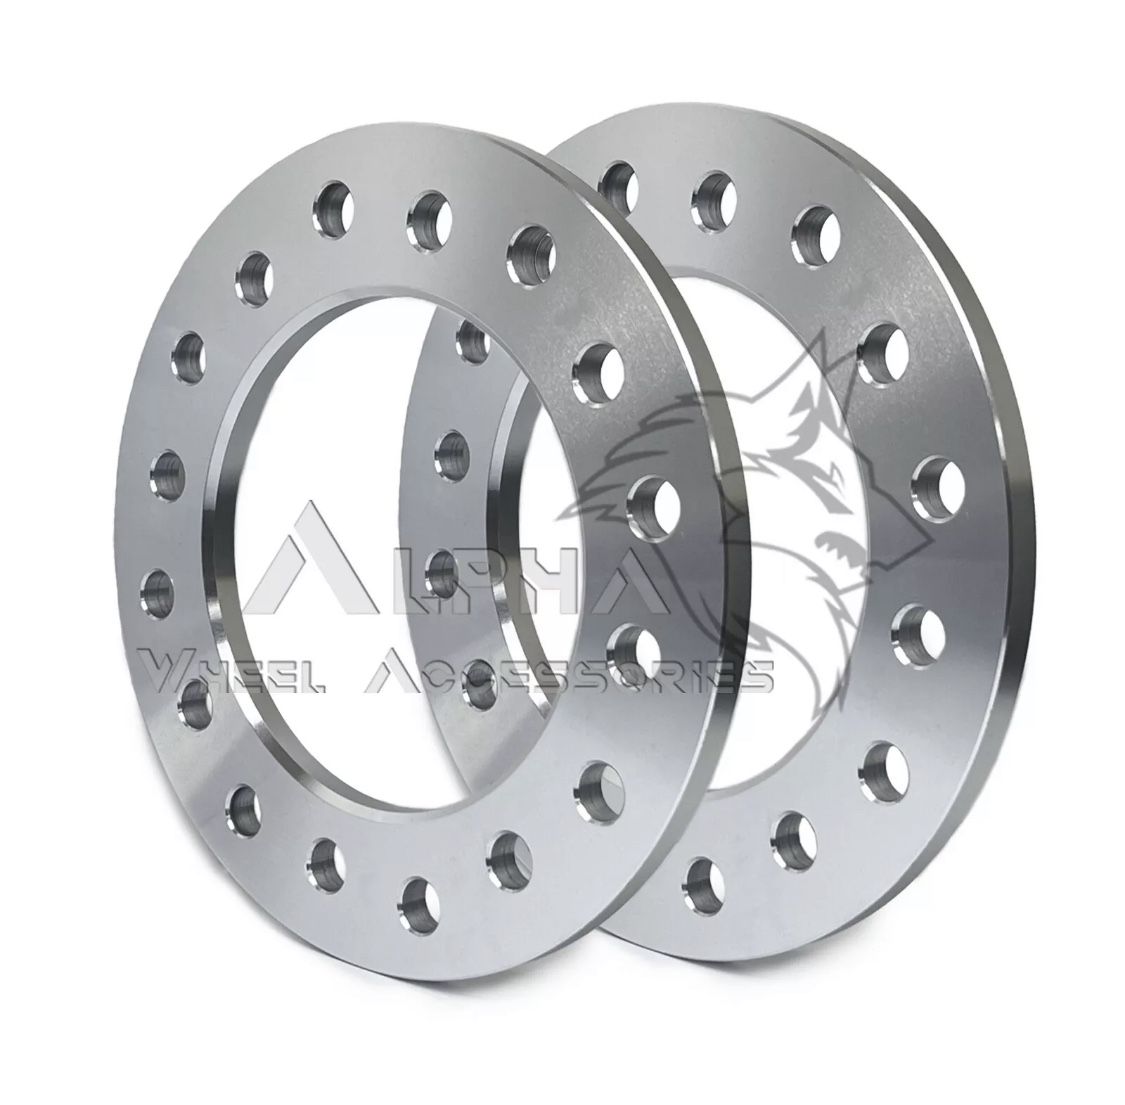 2 Billet 8x200 Dually Wheel Spacers 1/2" (12mm) Thick Fits Ford F-350 Super Duty